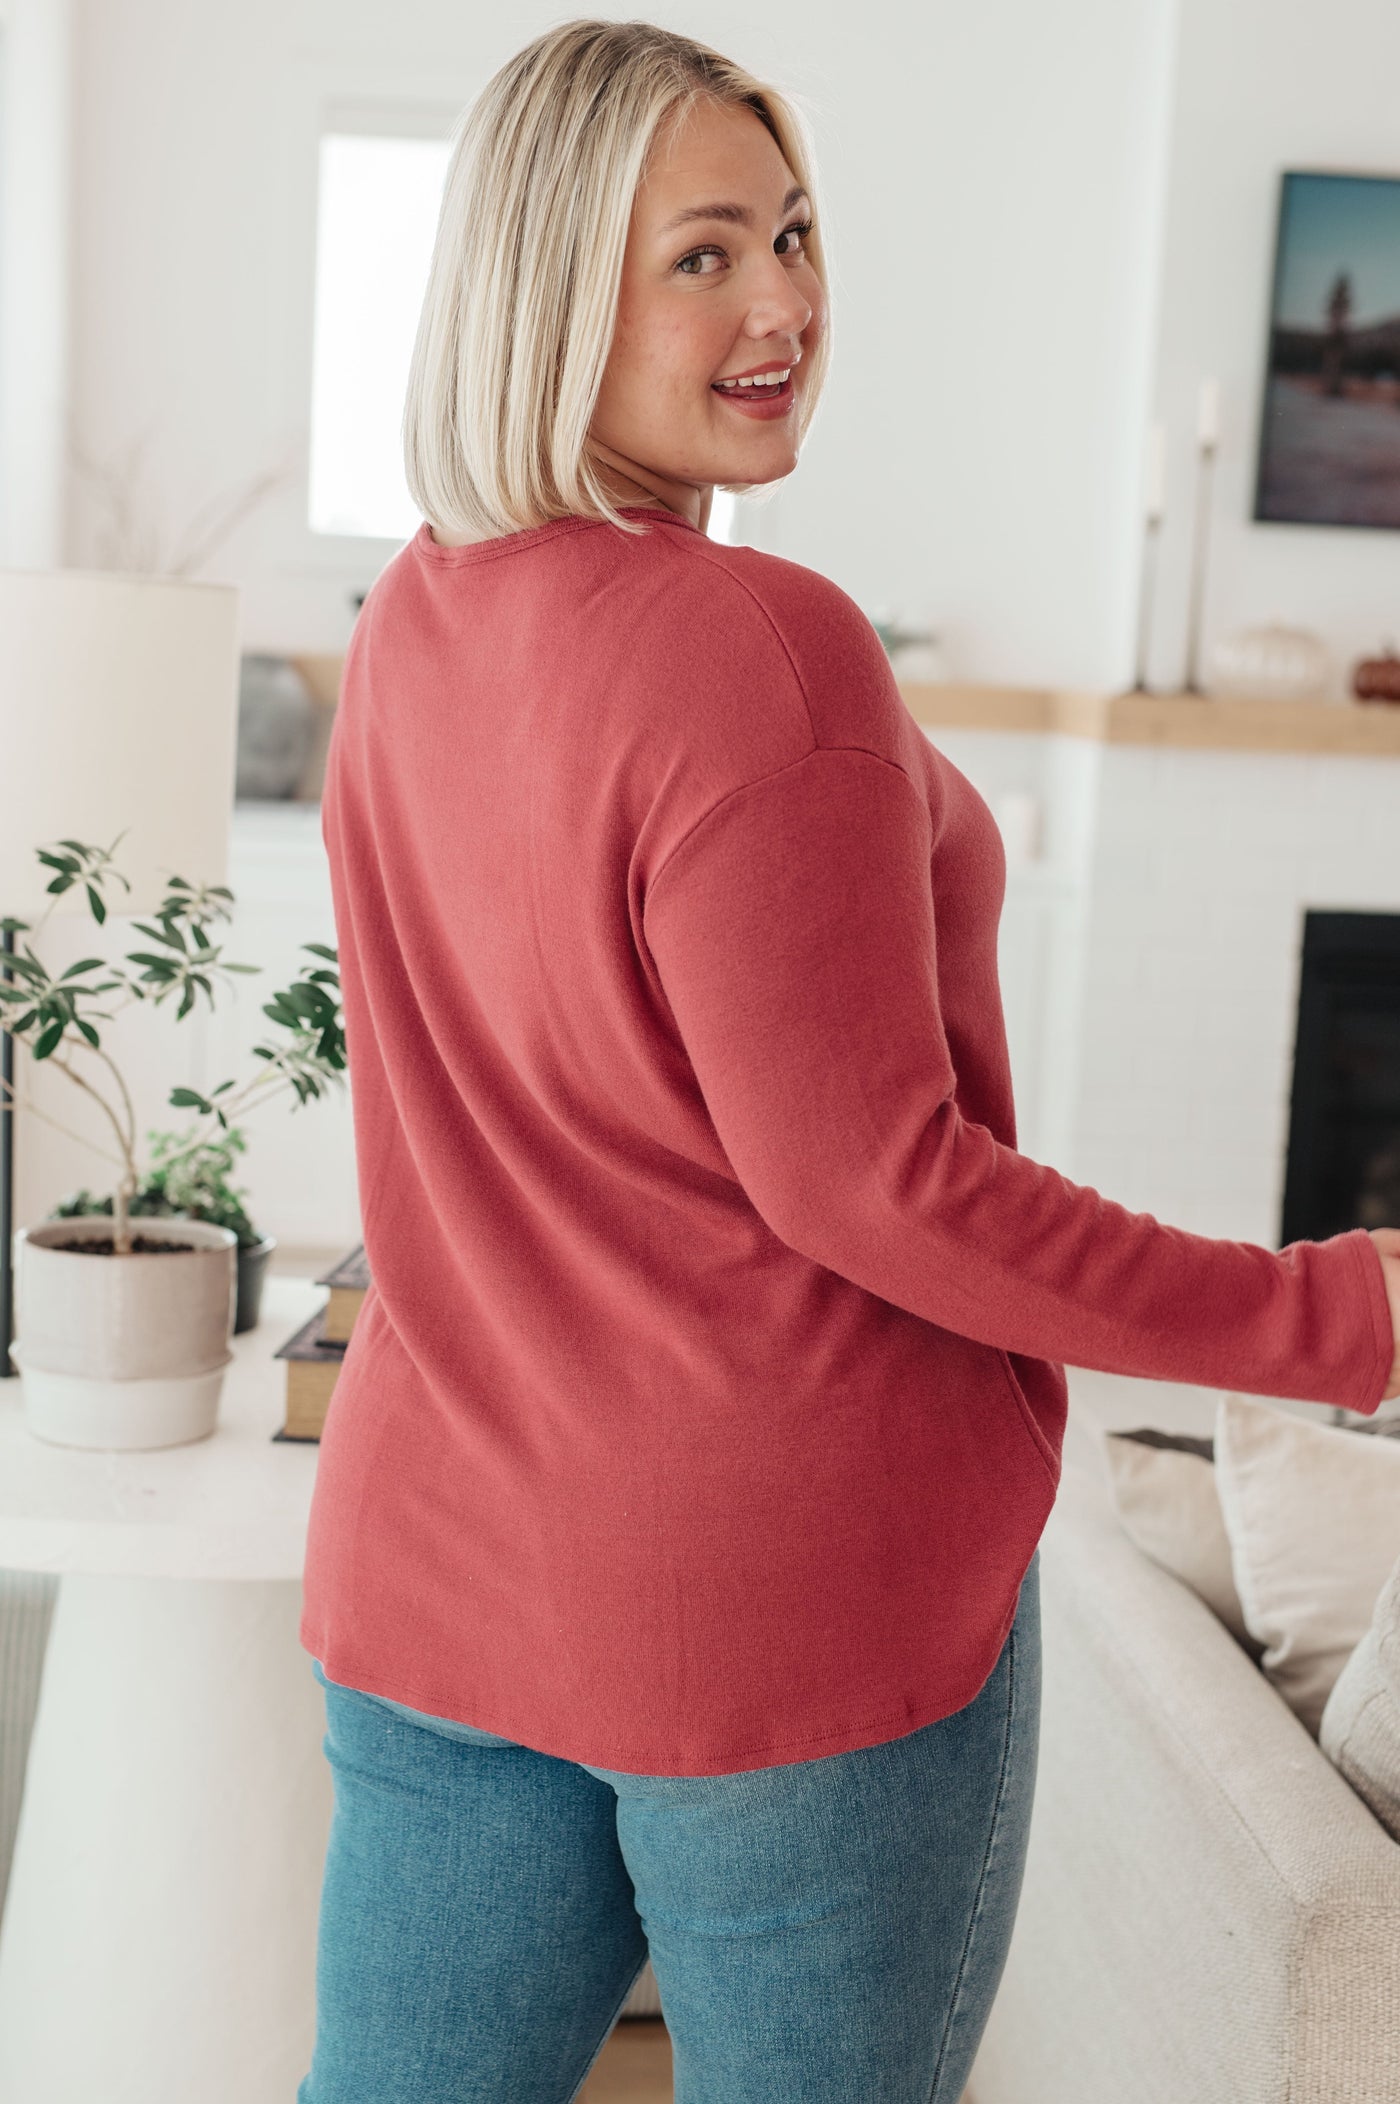 Snuggle up in our ultra-soft If I'm Picking Long Sleeve Tops. Perfect for cozy days or a chilly night out, these tops feature a dropped shoulder and easy fit, so you'll feel comfortable and stylish.